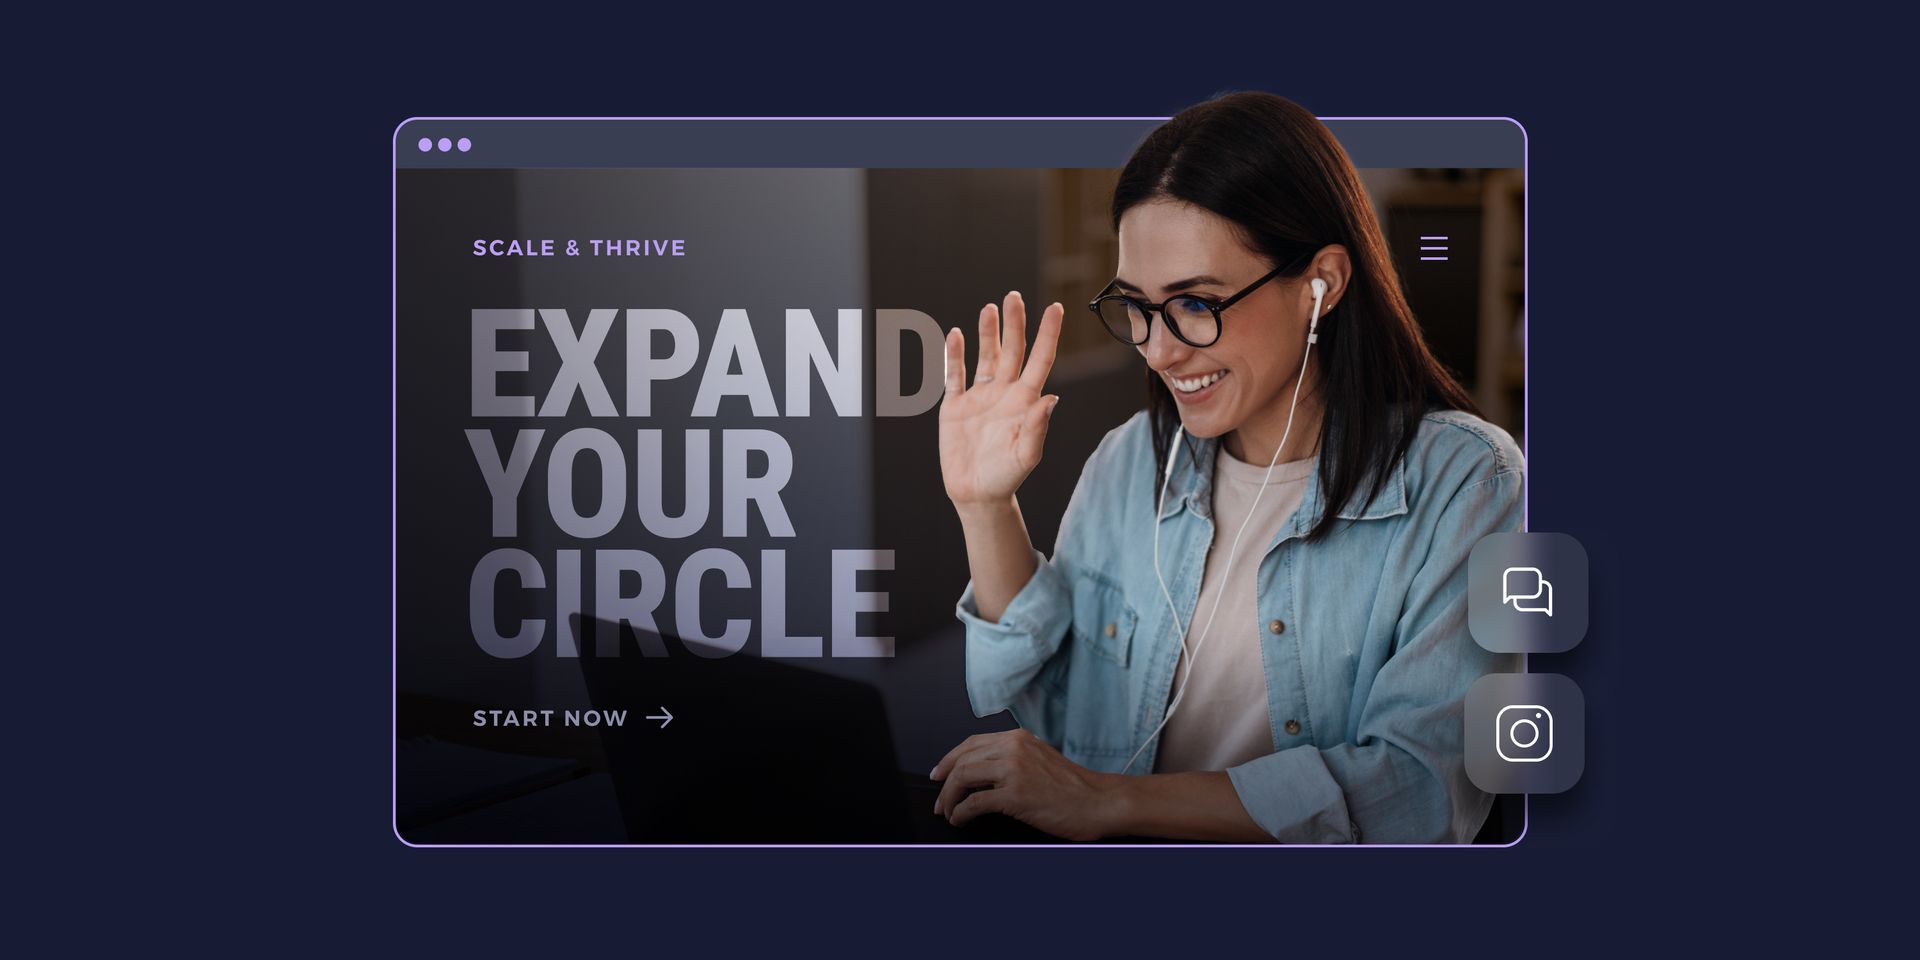 Expand your circle to scale an agency